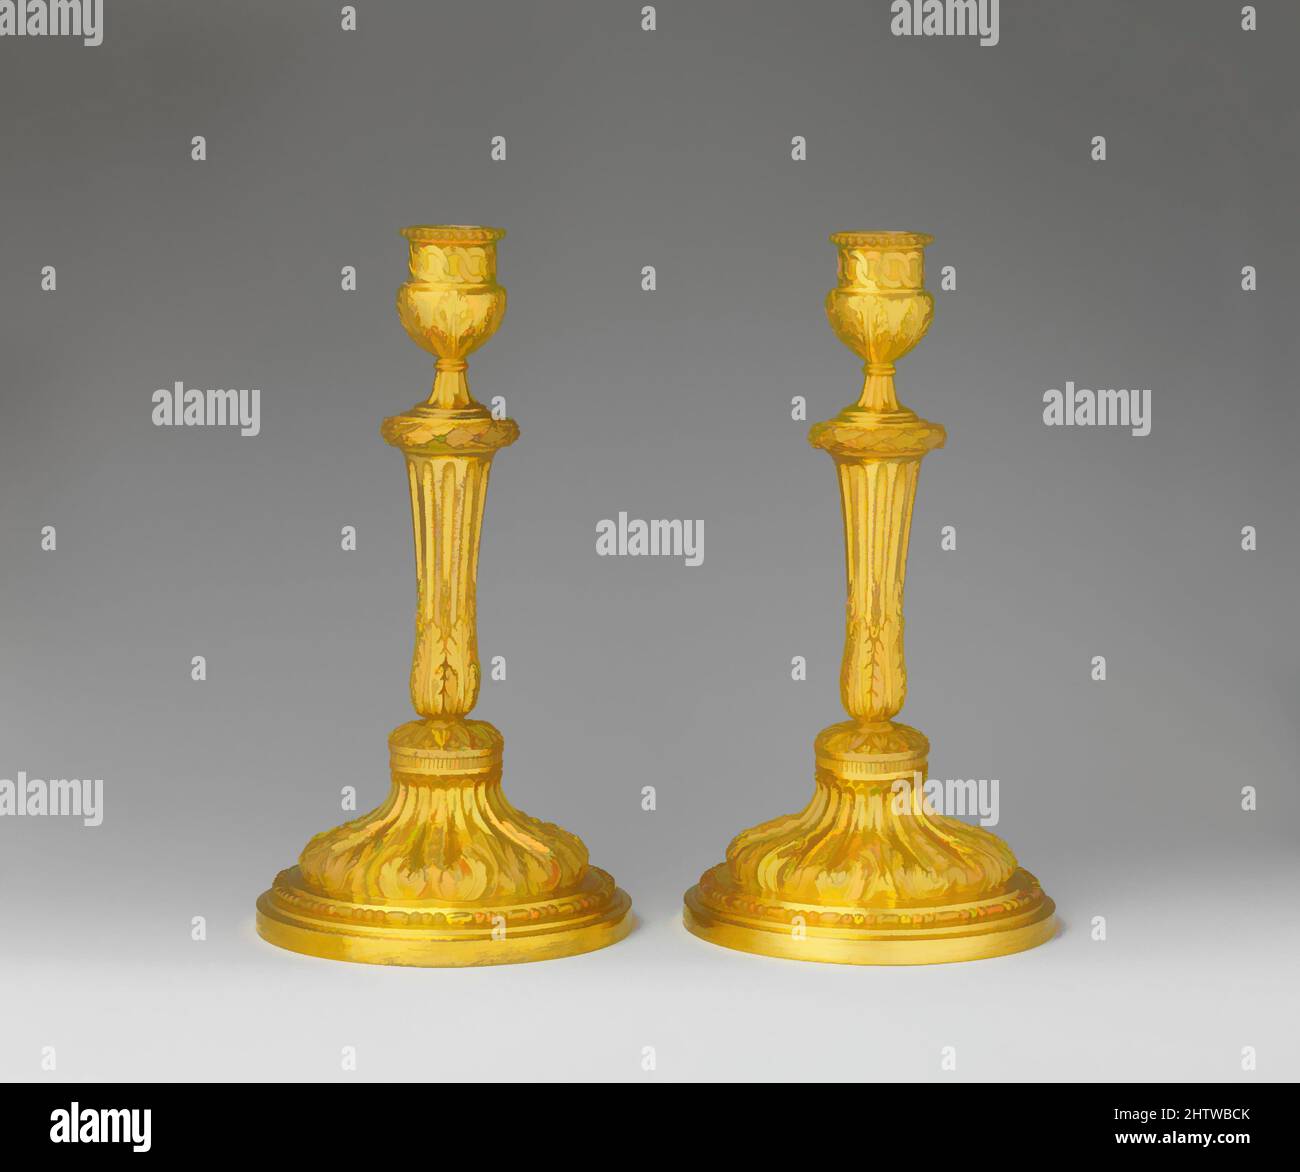 Art inspired by Pair of candlesticks, ca. 1770–75, French, Gilt bronze, Overall (confirmed): 10 1/2 x 5 5/8 in. (26.7 x 14.3 cm), Metalwork-Gilt Bronze, Classic works modernized by Artotop with a splash of modernity. Shapes, color and value, eye-catching visual impact on art. Emotions through freedom of artworks in a contemporary way. A timeless message pursuing a wildly creative new direction. Artists turning to the digital medium and creating the Artotop NFT Stock Photo